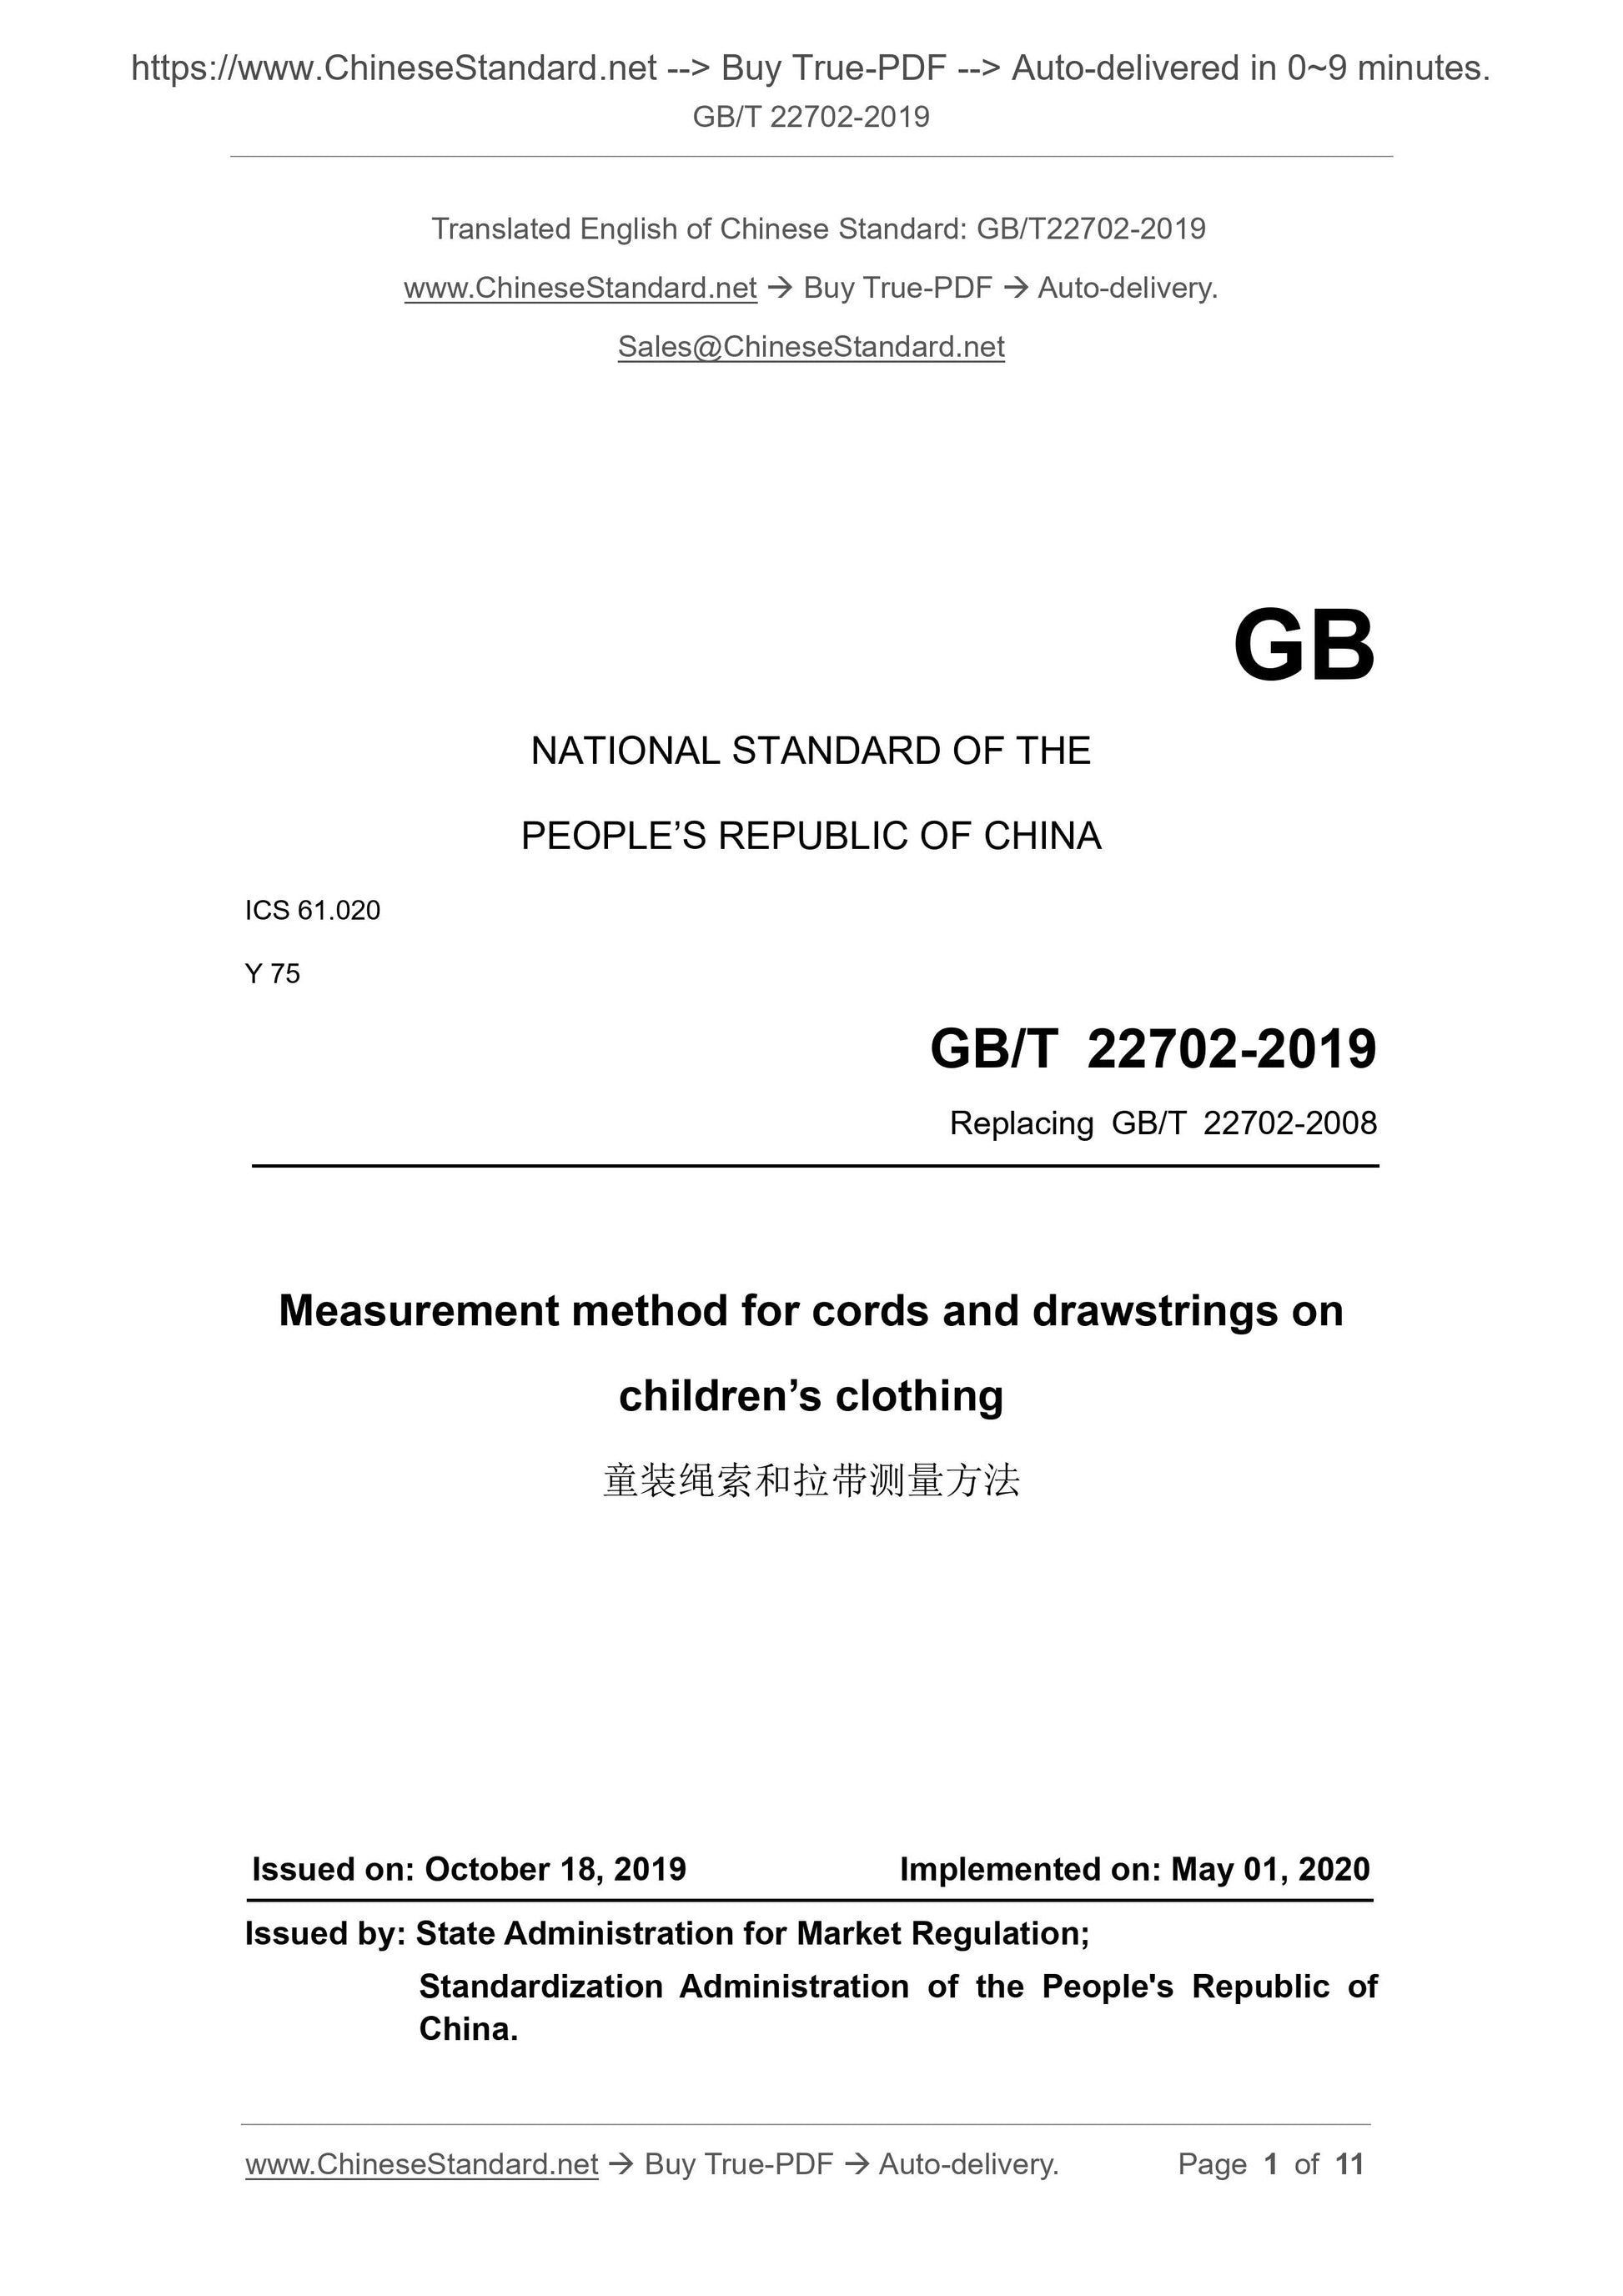 GB/T 22702-2019 Page 1